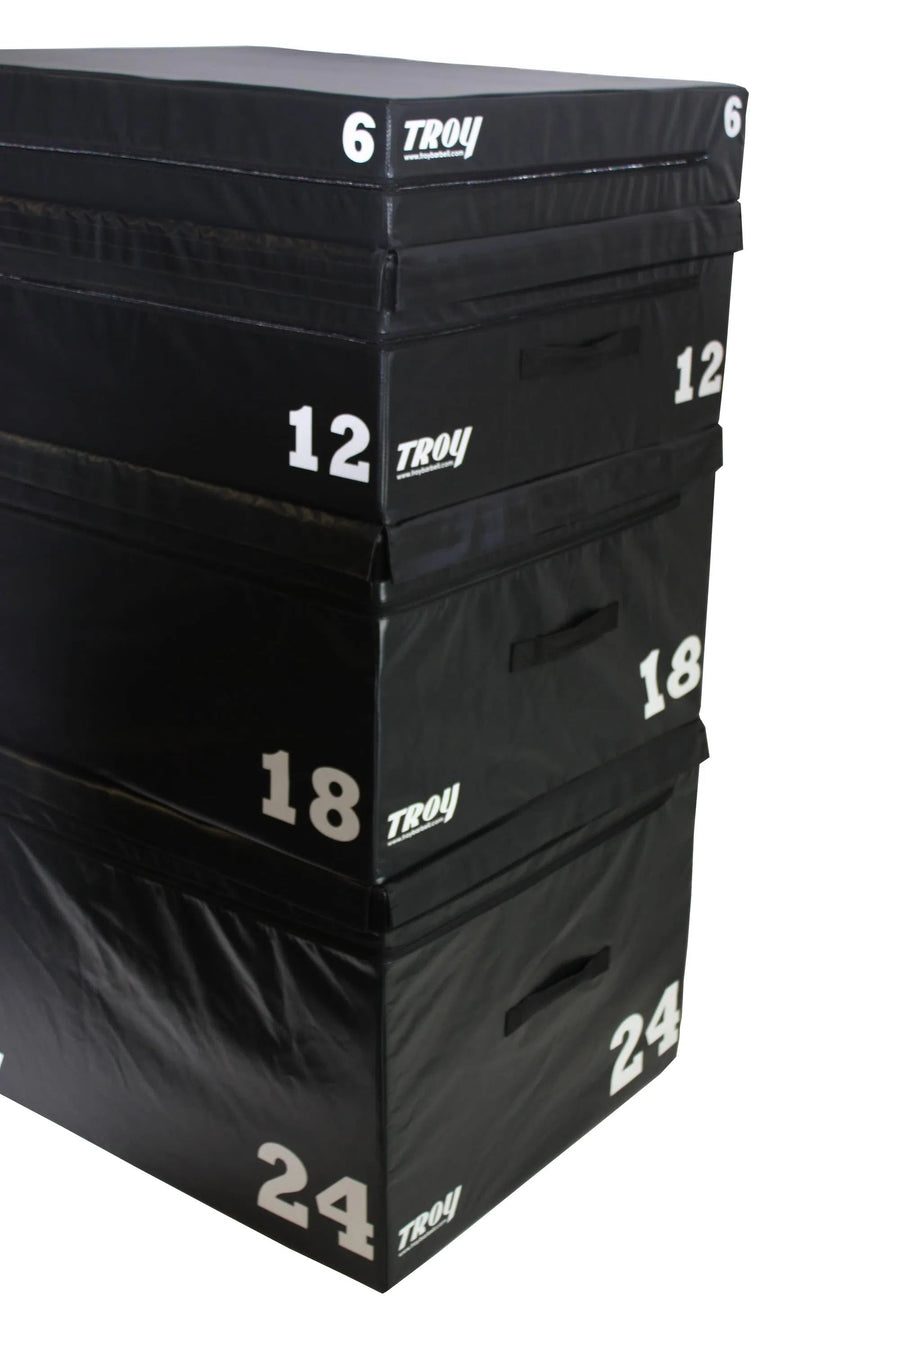 Troy Barbell Stackable Plyo Box T-PLYO-PAC Muscle and Strength Training Solution Healthy and Safe Workout